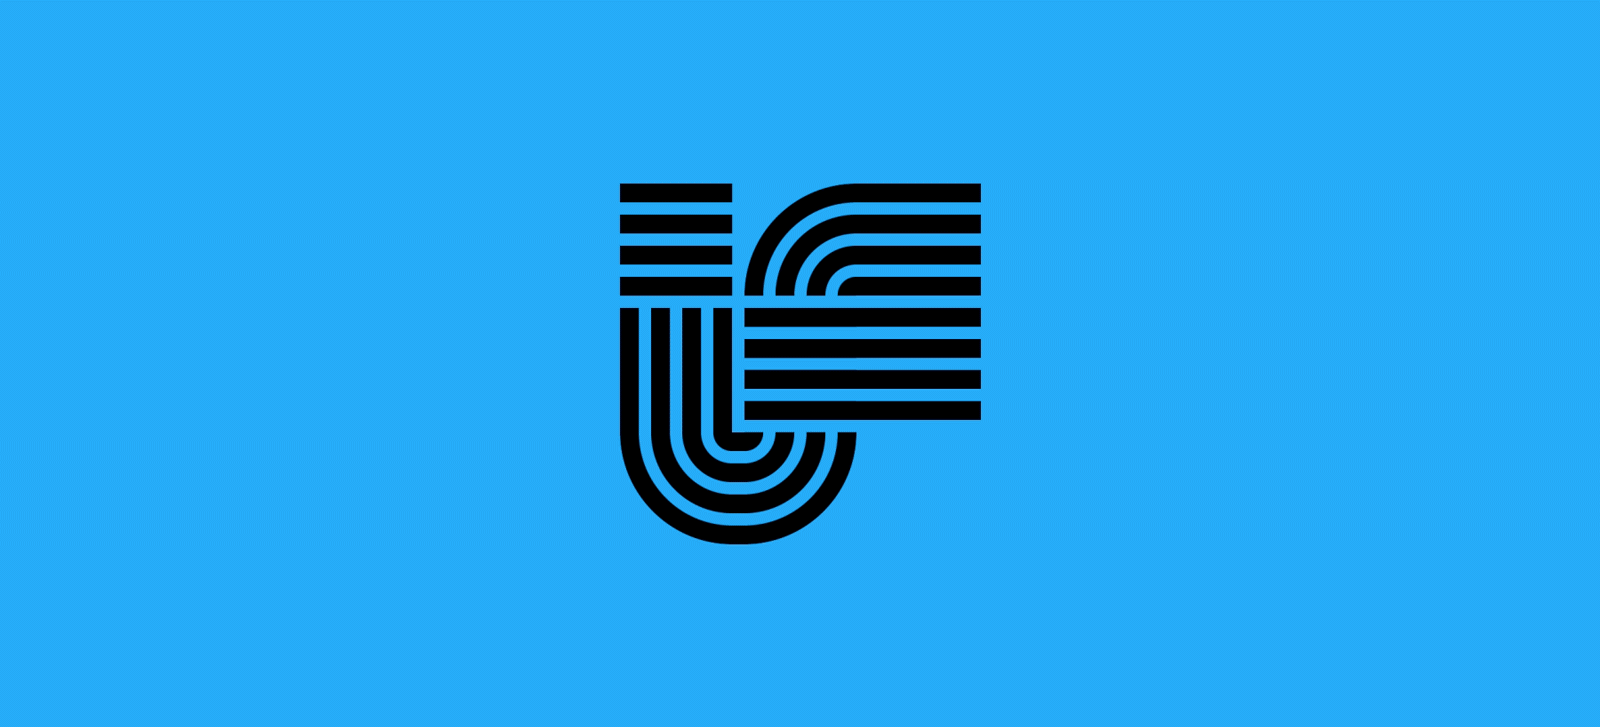 IF’s logo in black, on a blue background. The logo disappears through a series of sweeping movements.